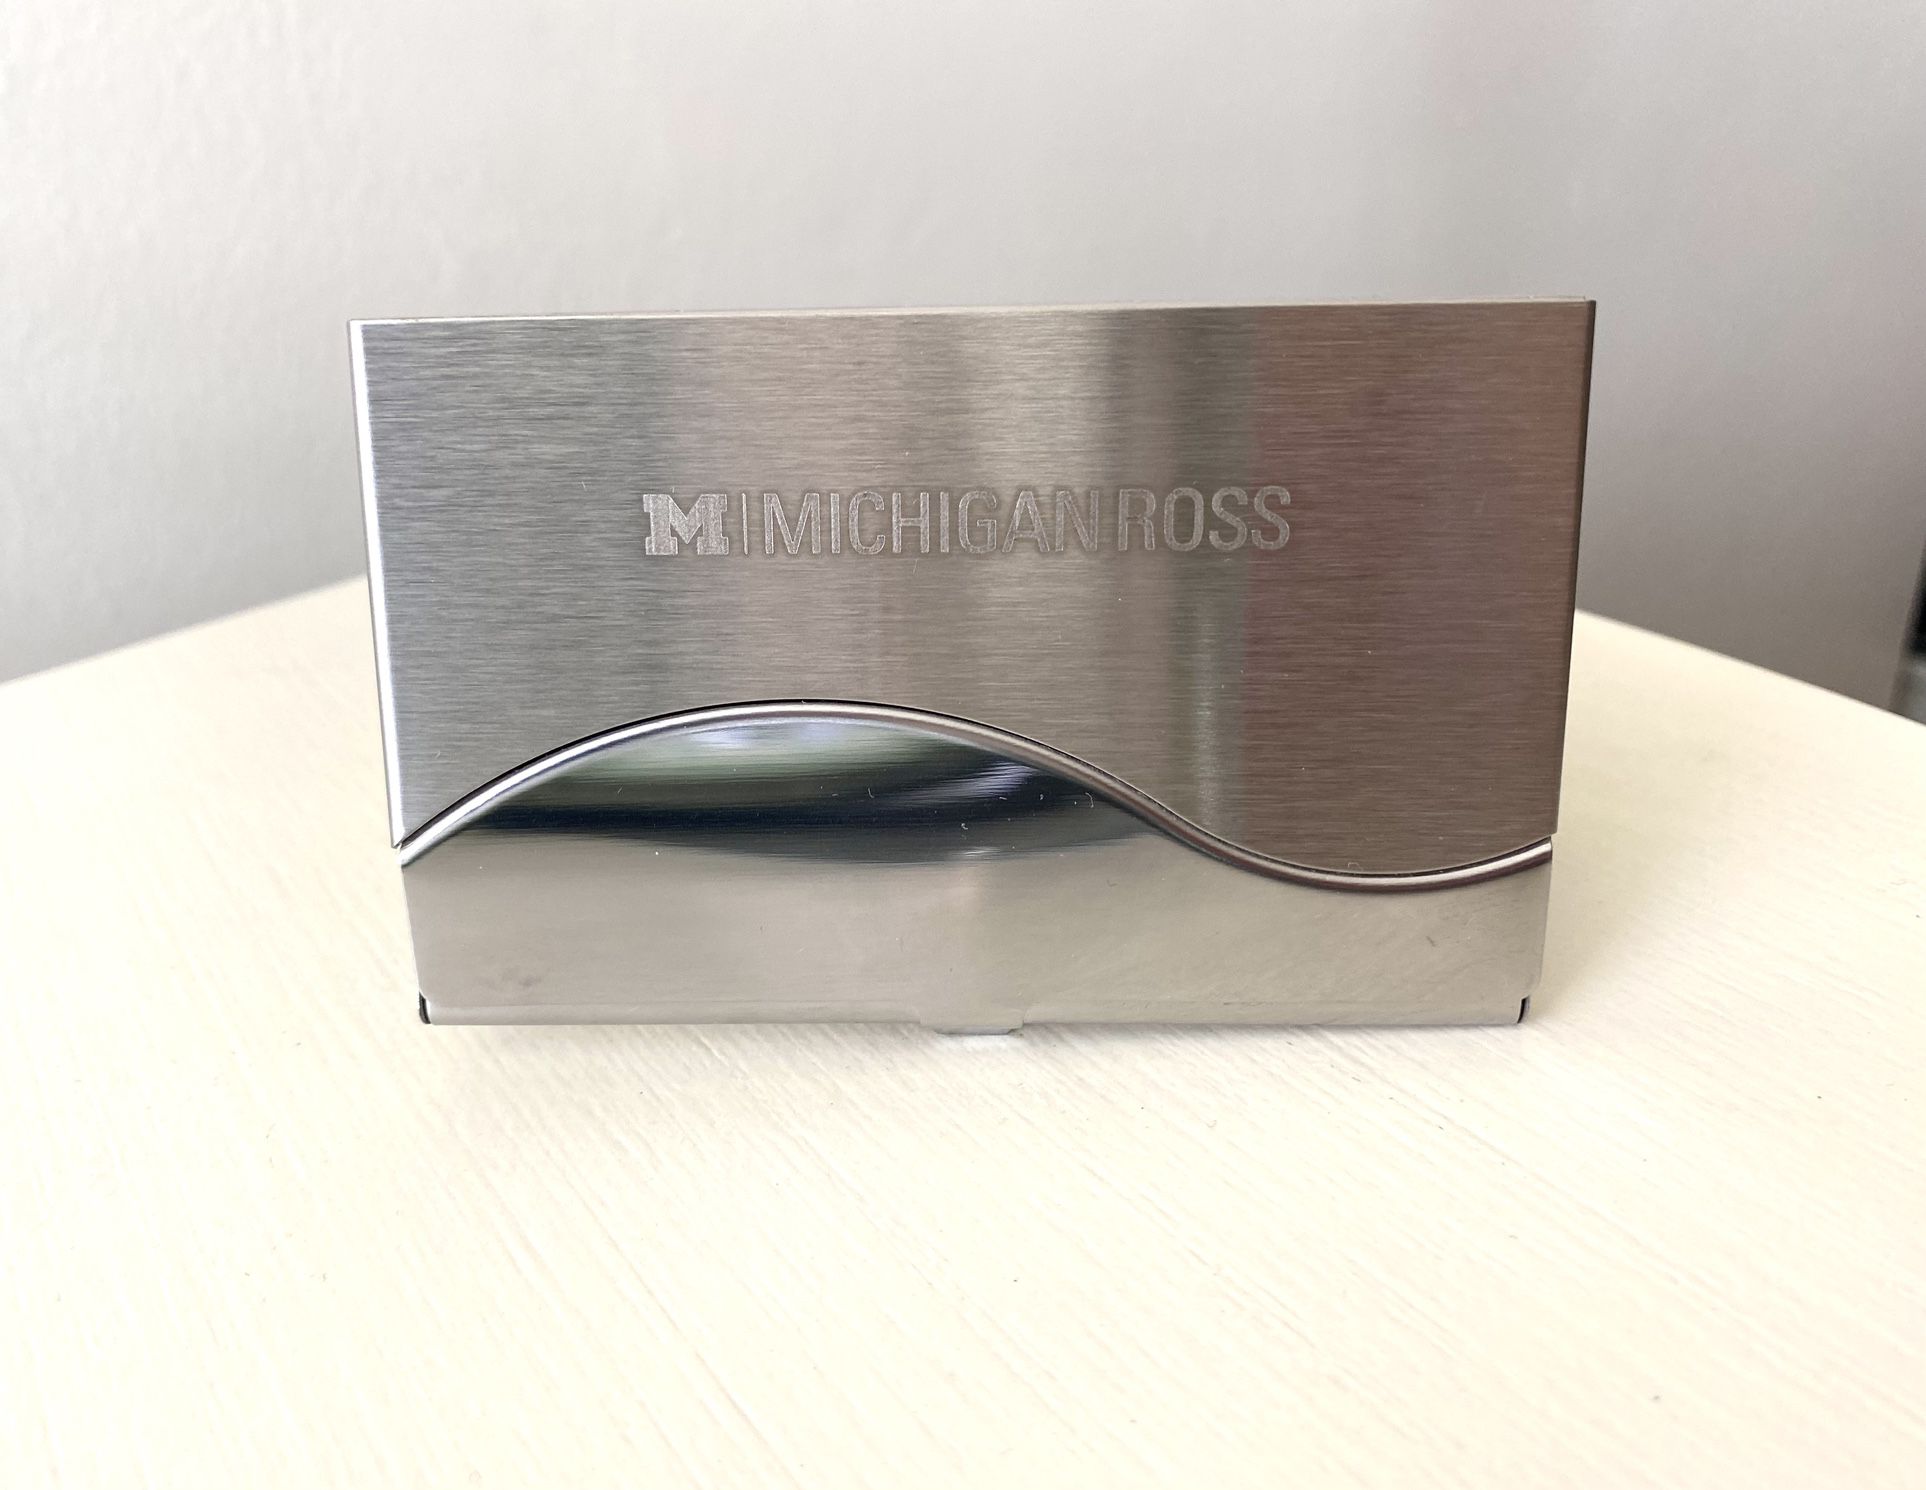 NEW University of Michigan Ross School of Business - Business Card Holder